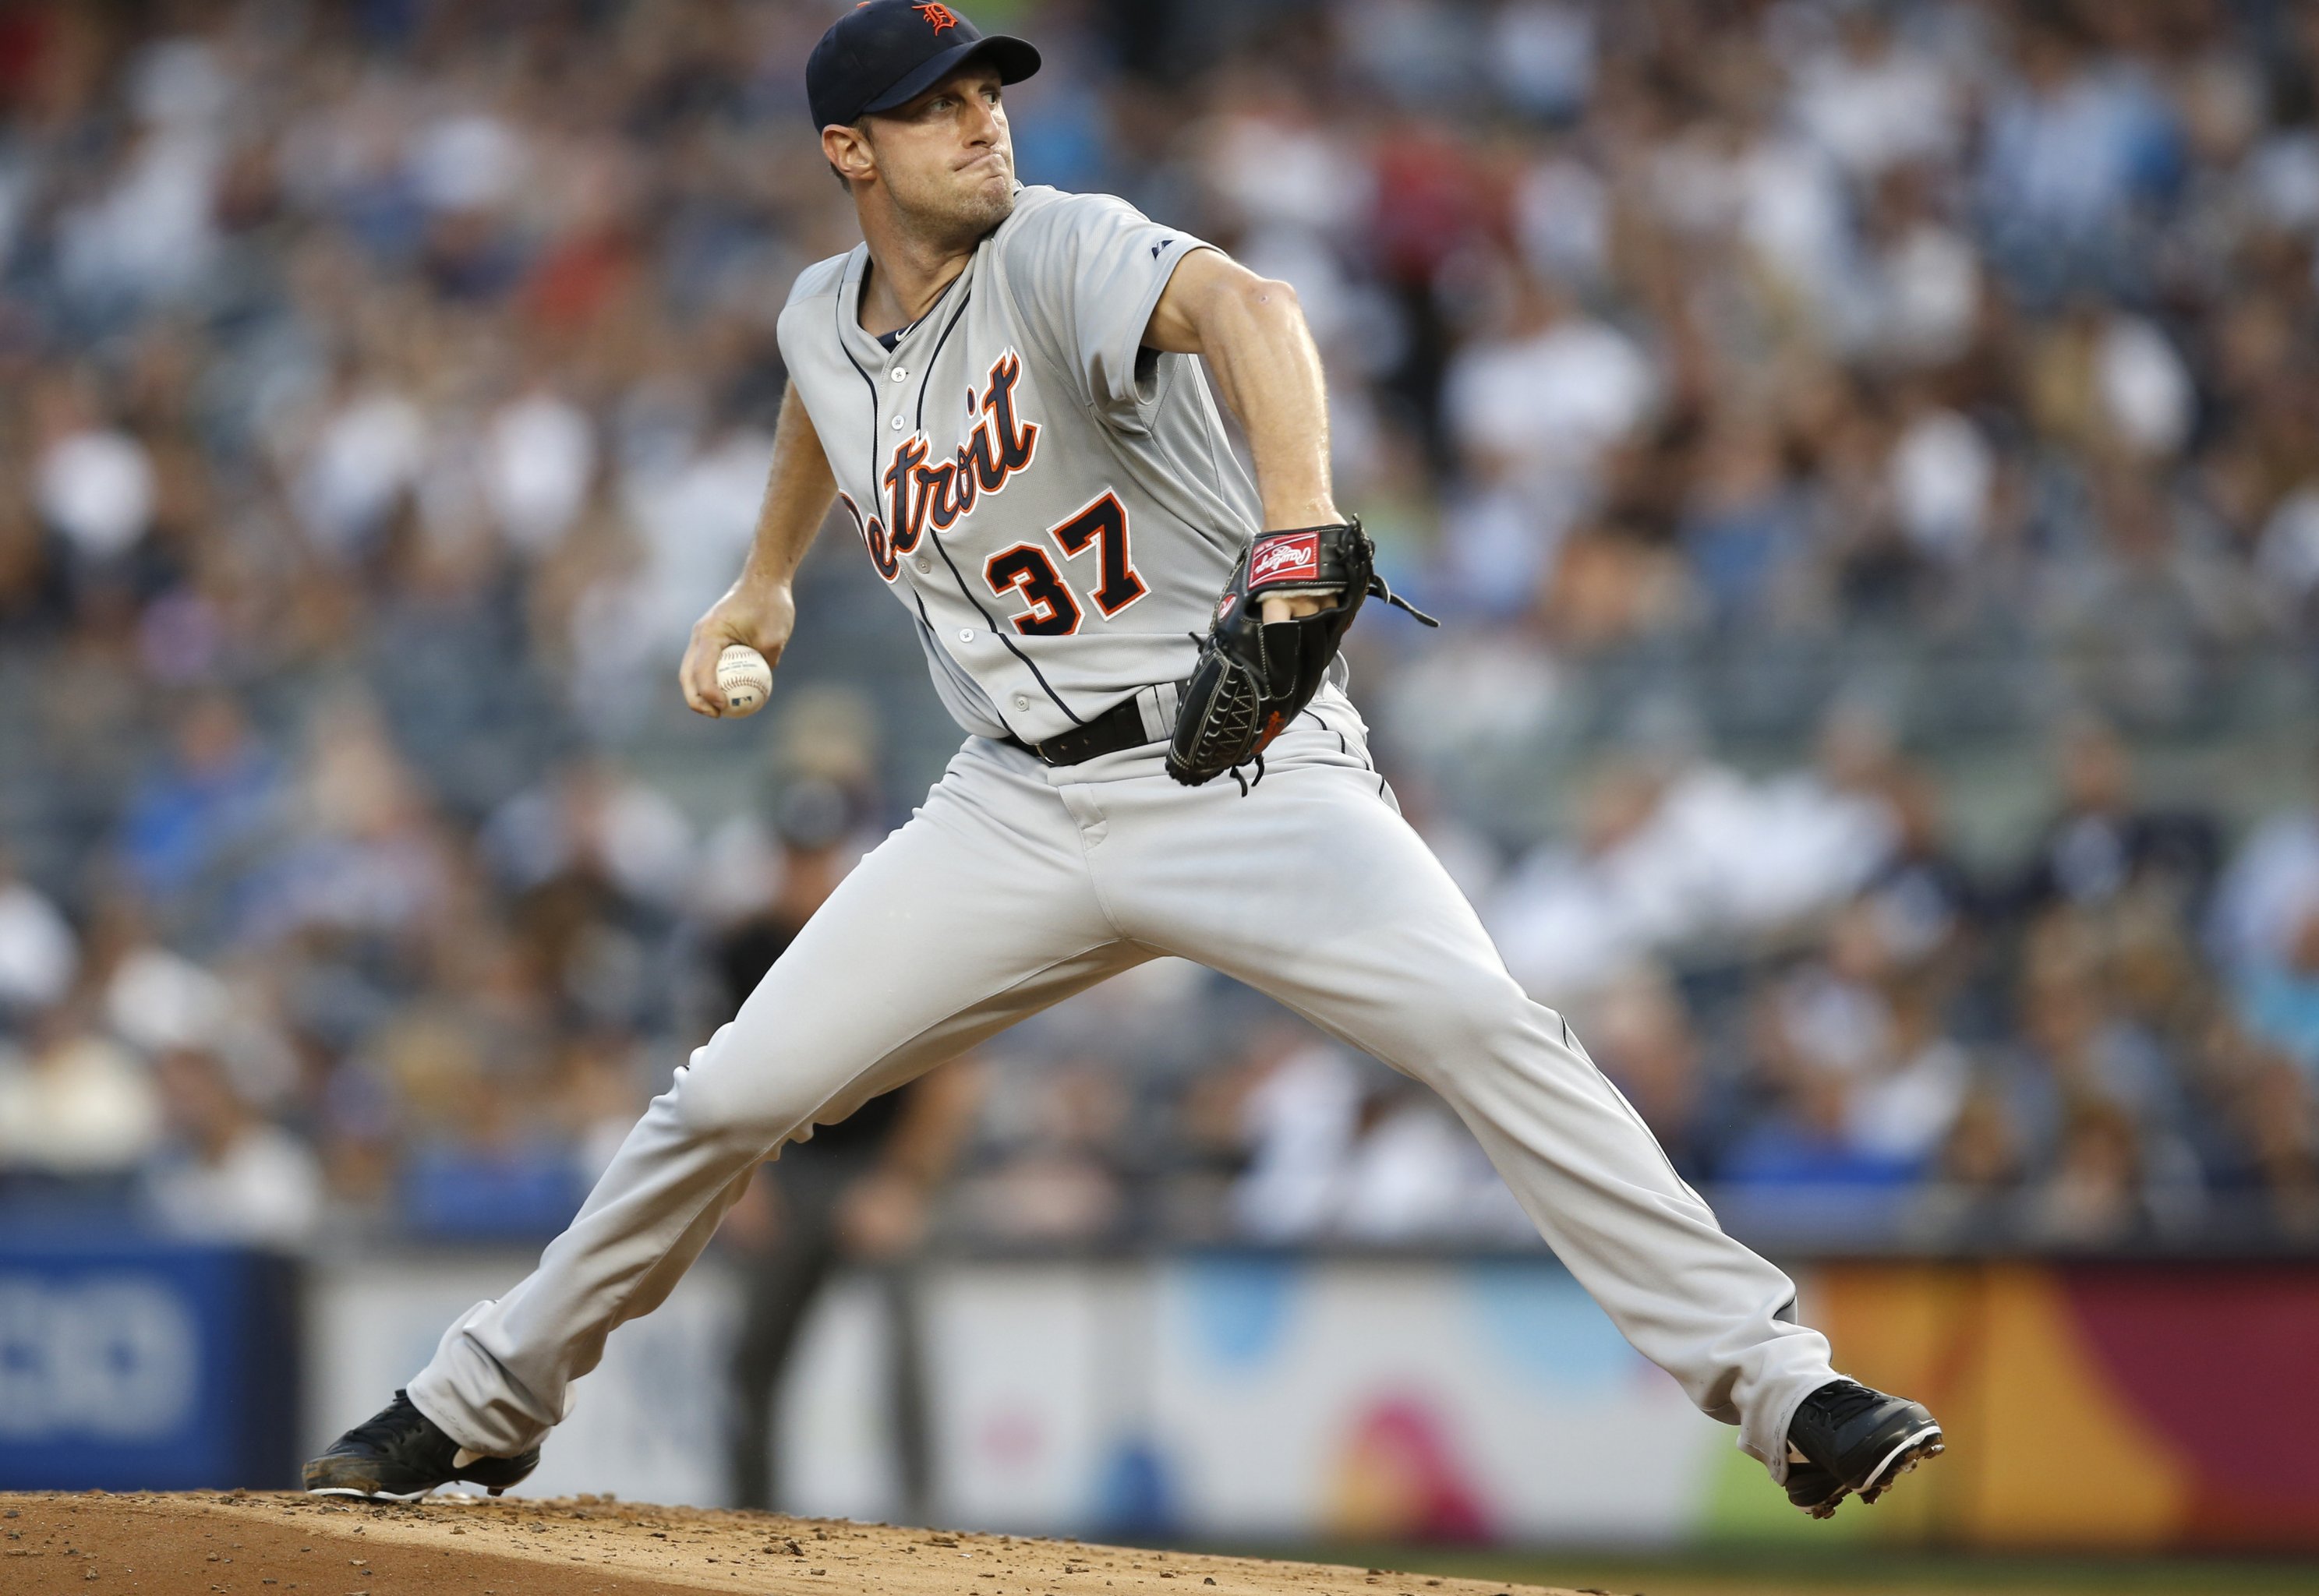 Ranking the Top 5 Detroit Tigers Pitchers of All Time